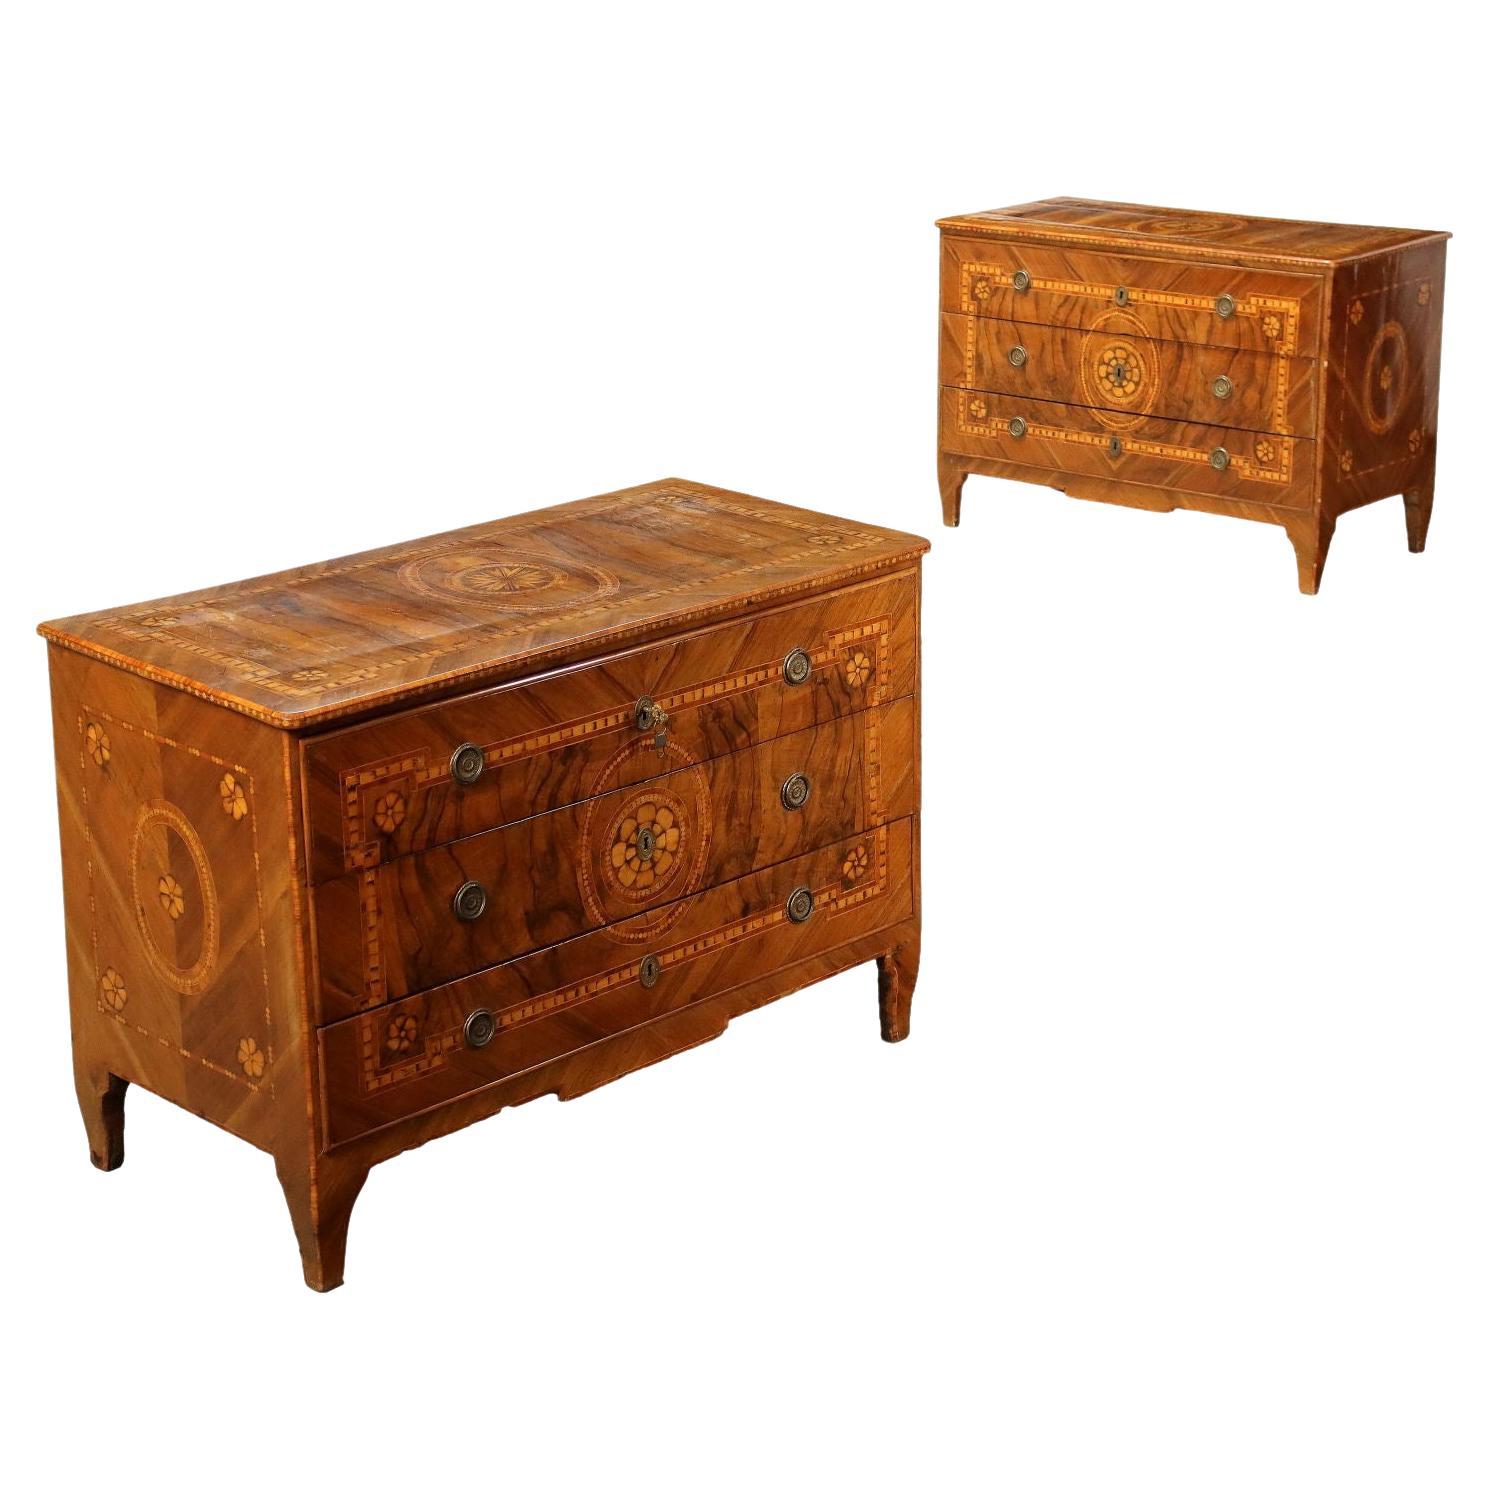 Pair of Louis XVI Chests of Drawers, Piacenza, Late 18th Century